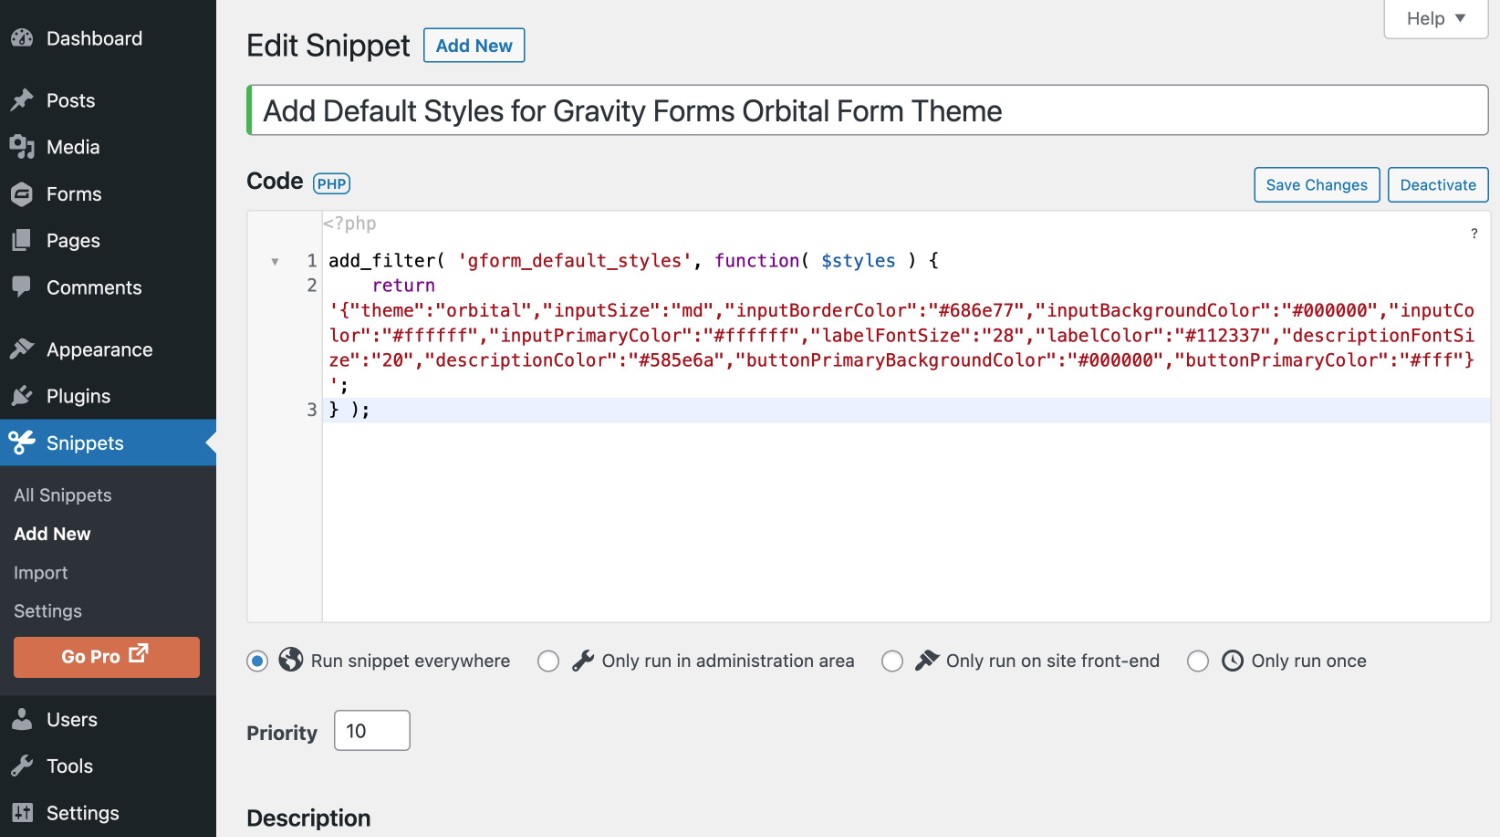 How to set default styles for Gravity Forms Orbital form theme